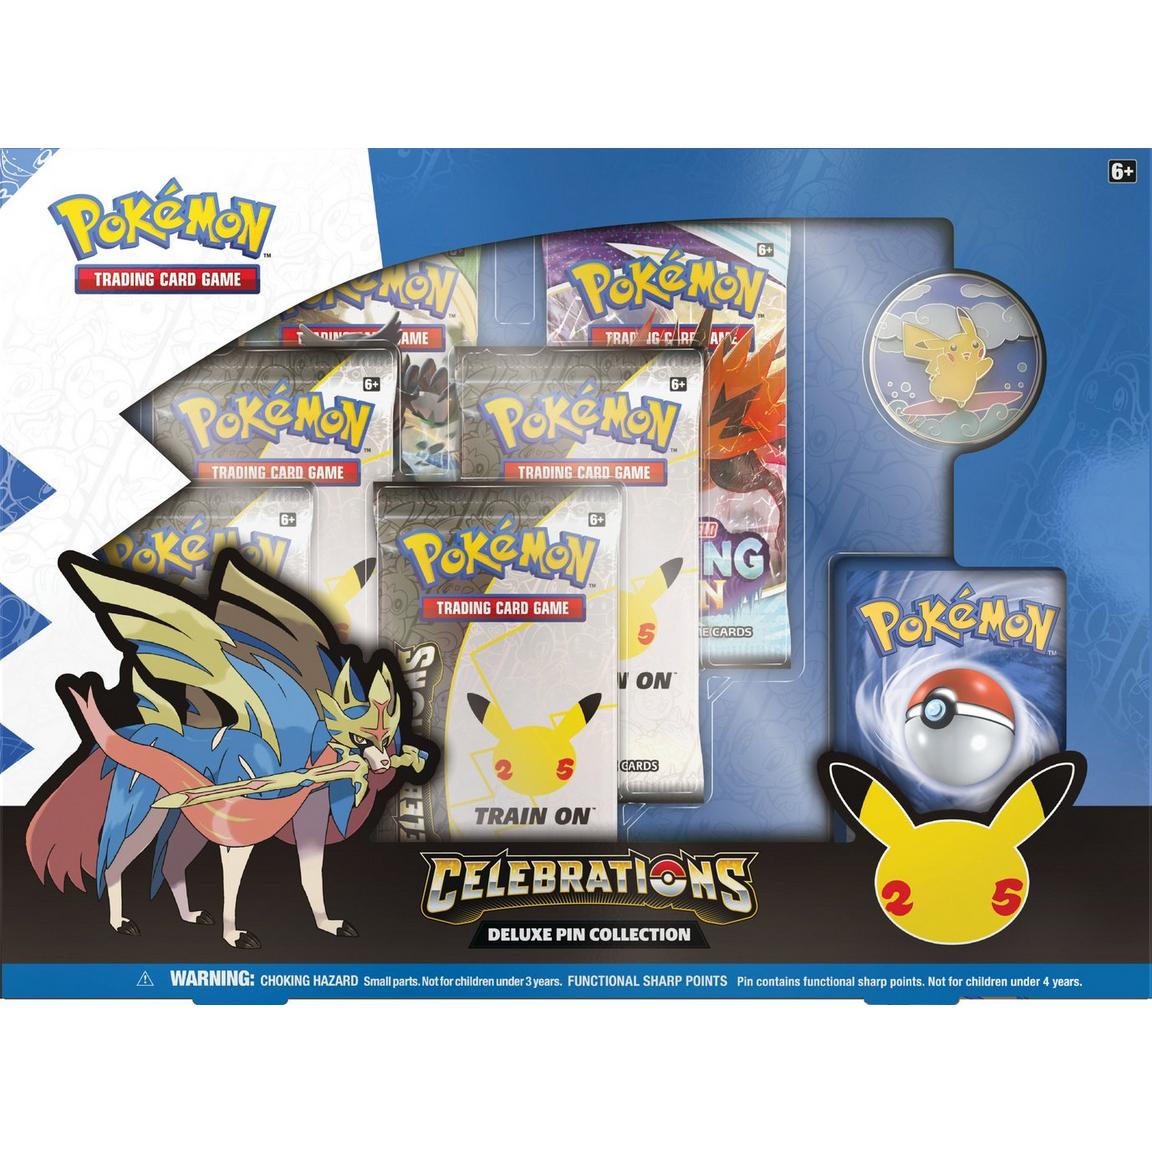 Pokemon Trading Card Game: Celebrations Deluxe Pin Collection $19.99 at GameStop